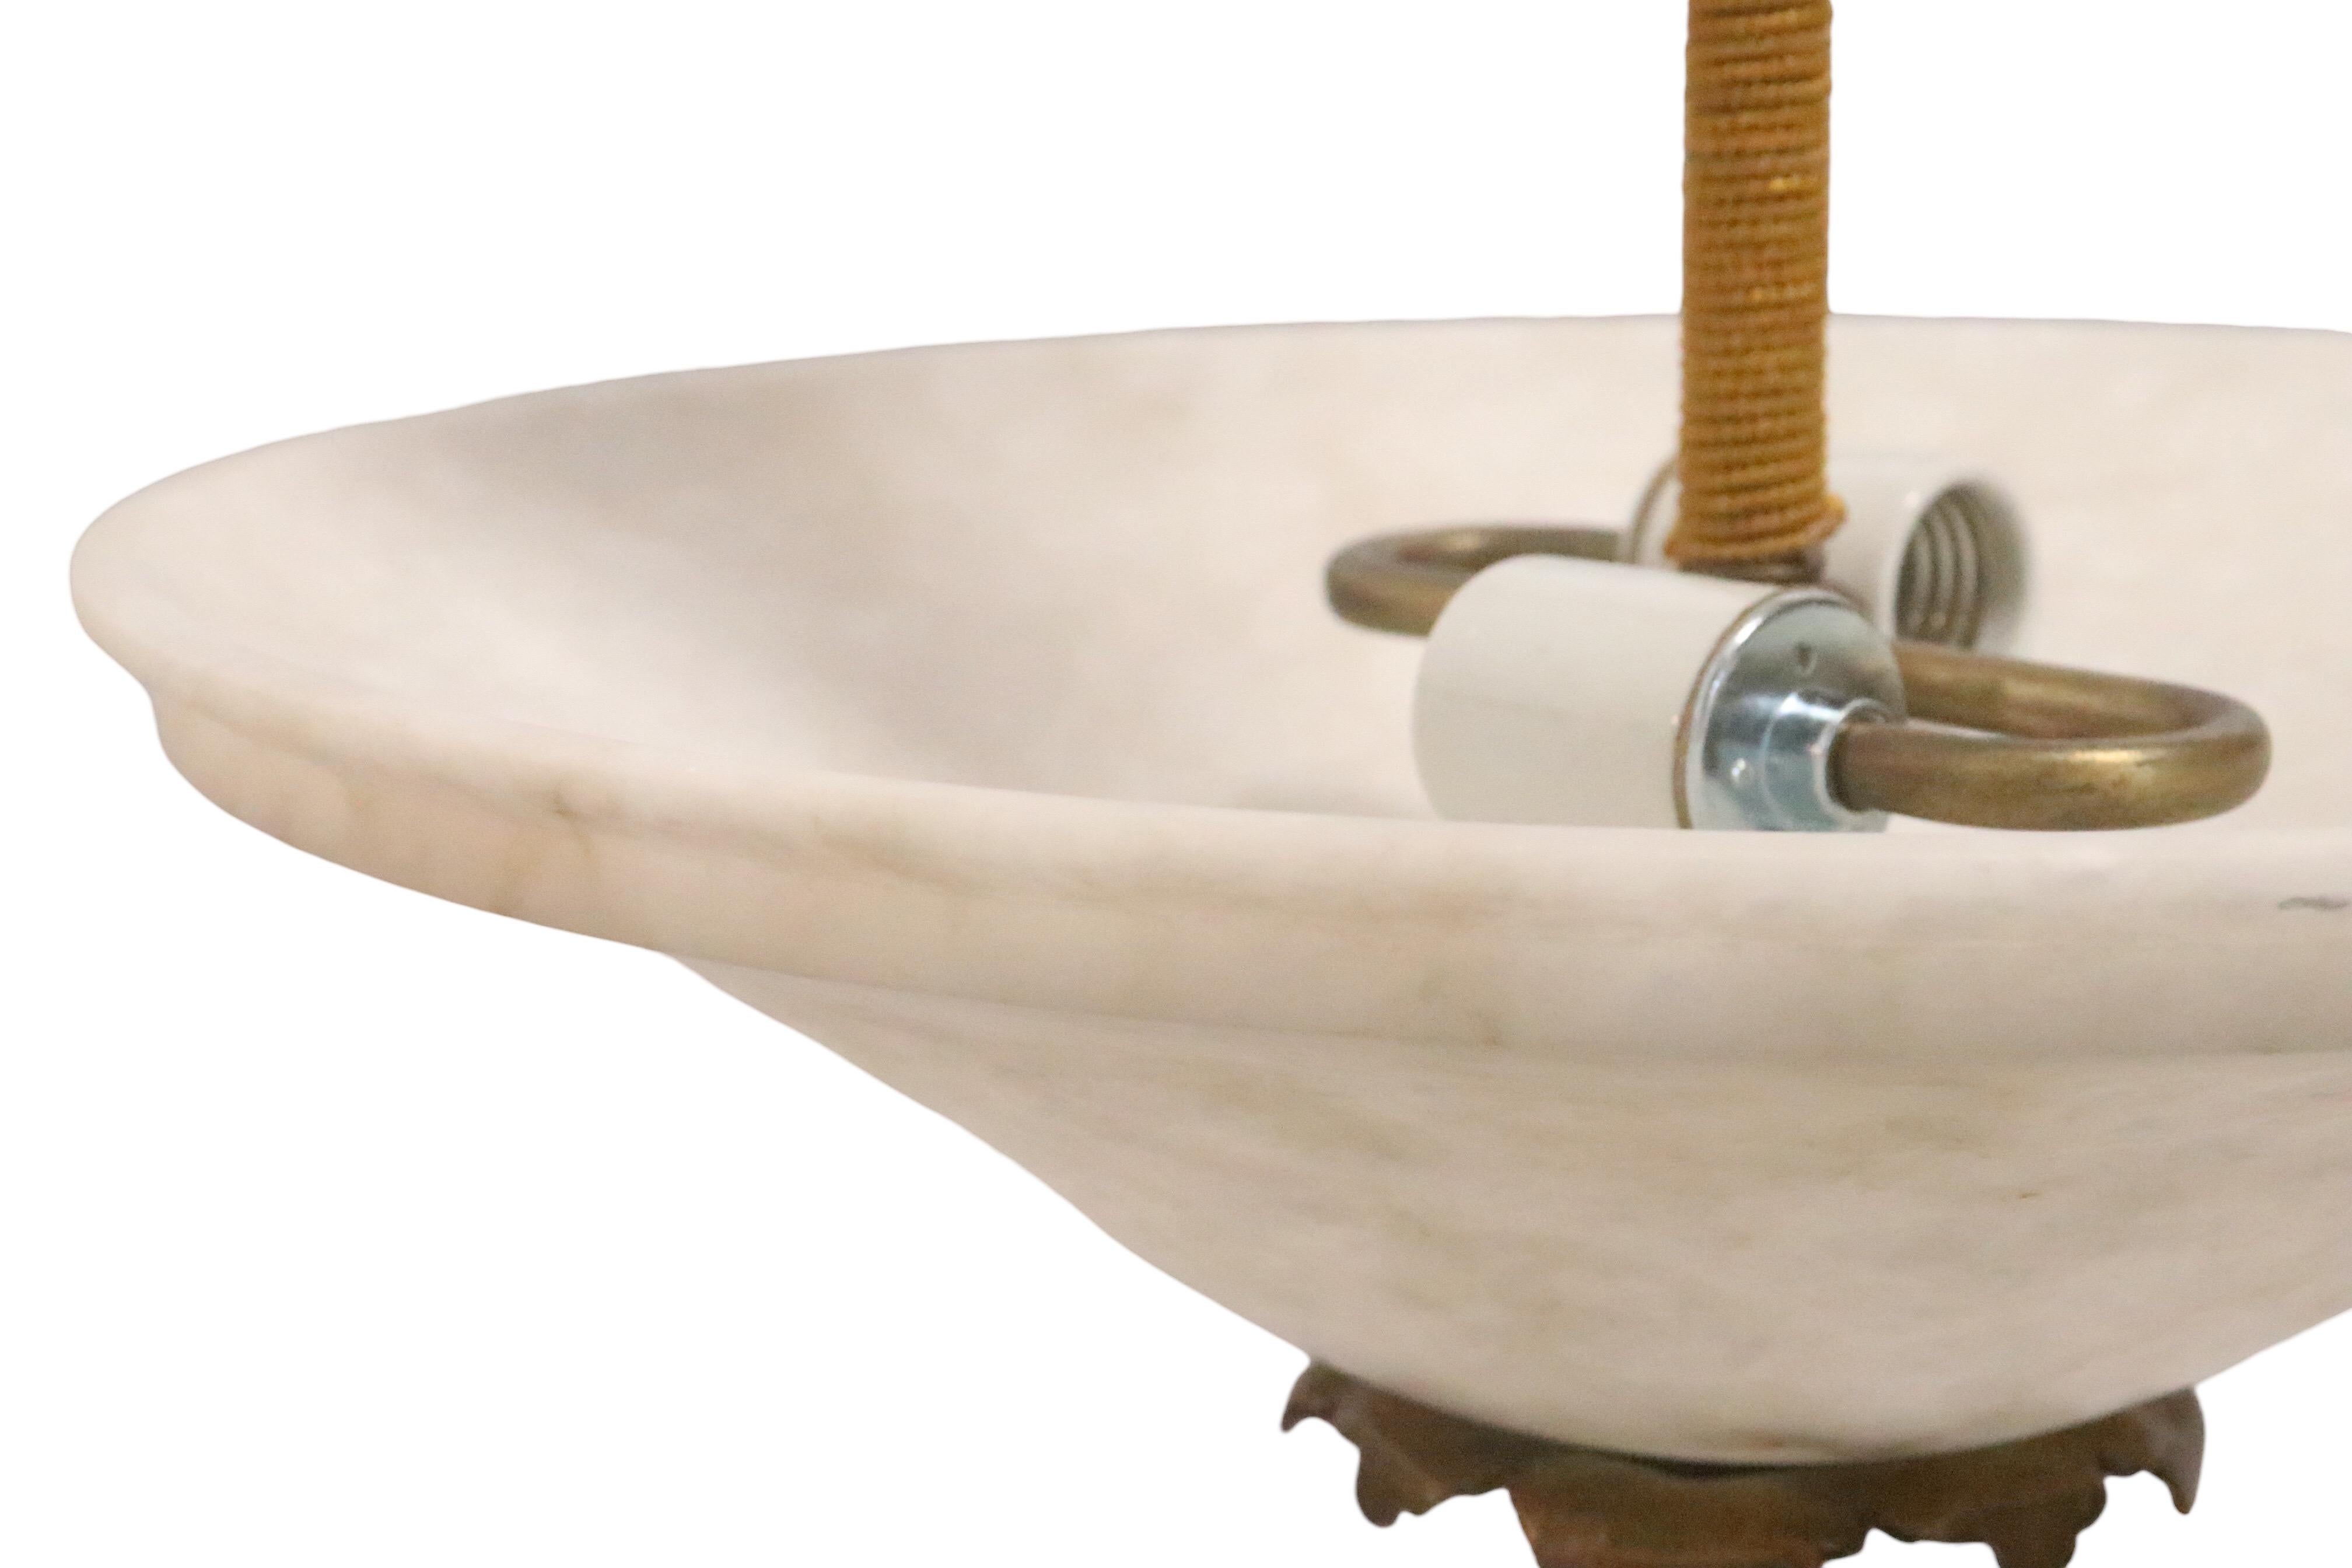 European Antique Alabaster Light Fixture with custom Silk Wrapped Stem & Bronze Fittings